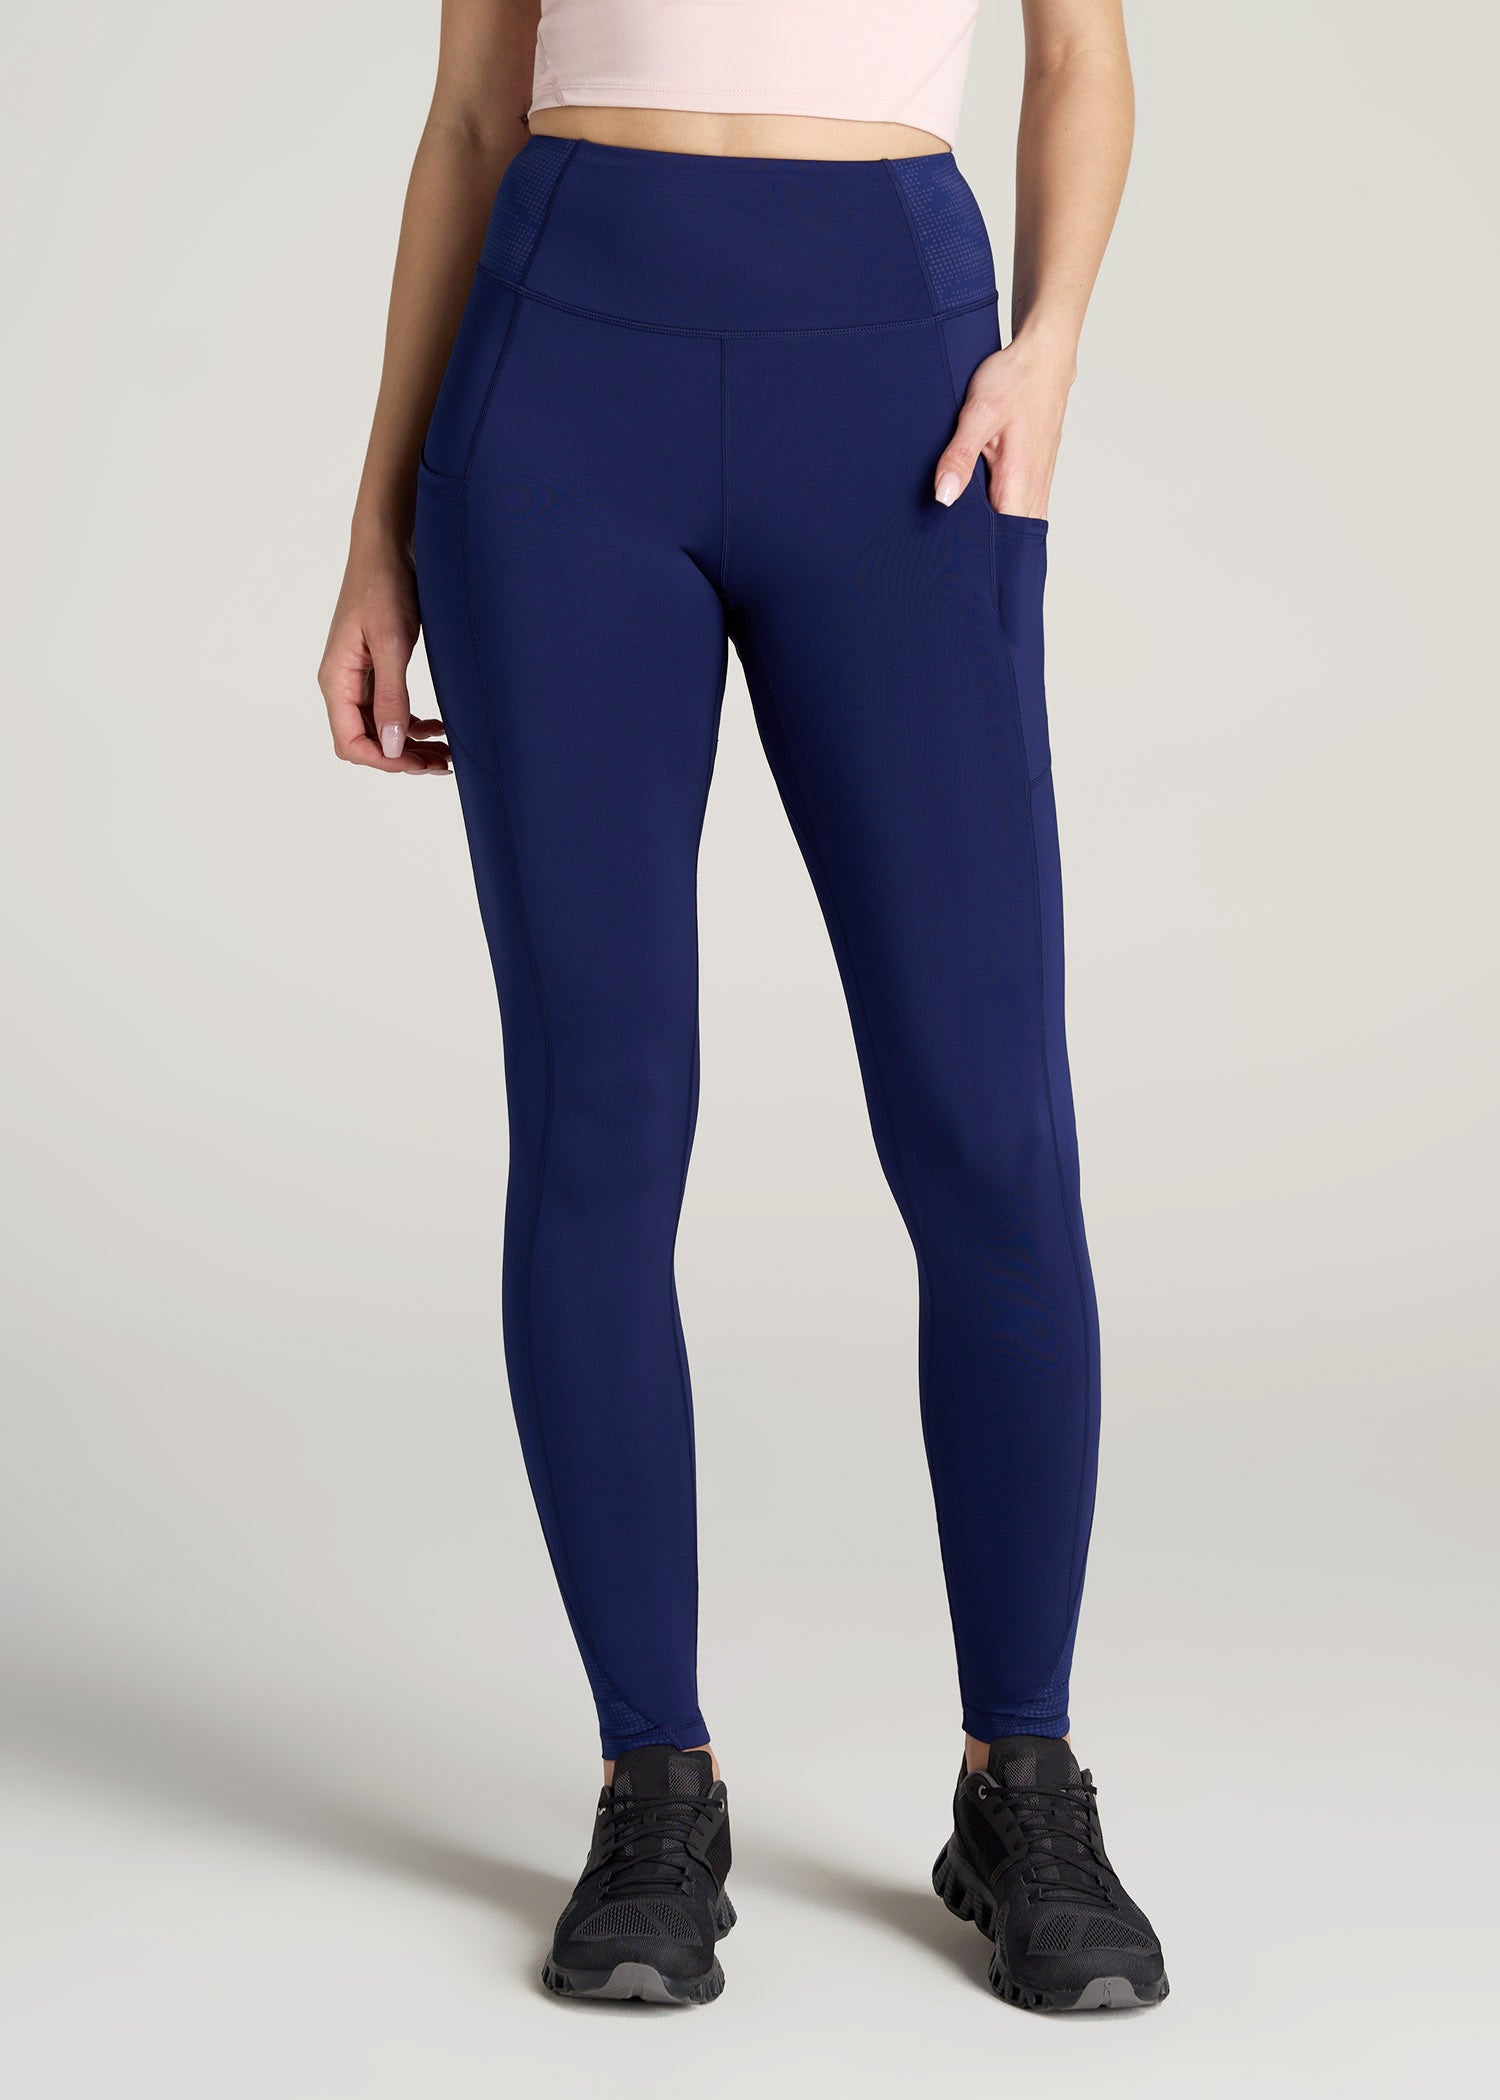 Buy the Womens Blue Flat Front Elastic Waist Activewear Compression  Leggings Size M